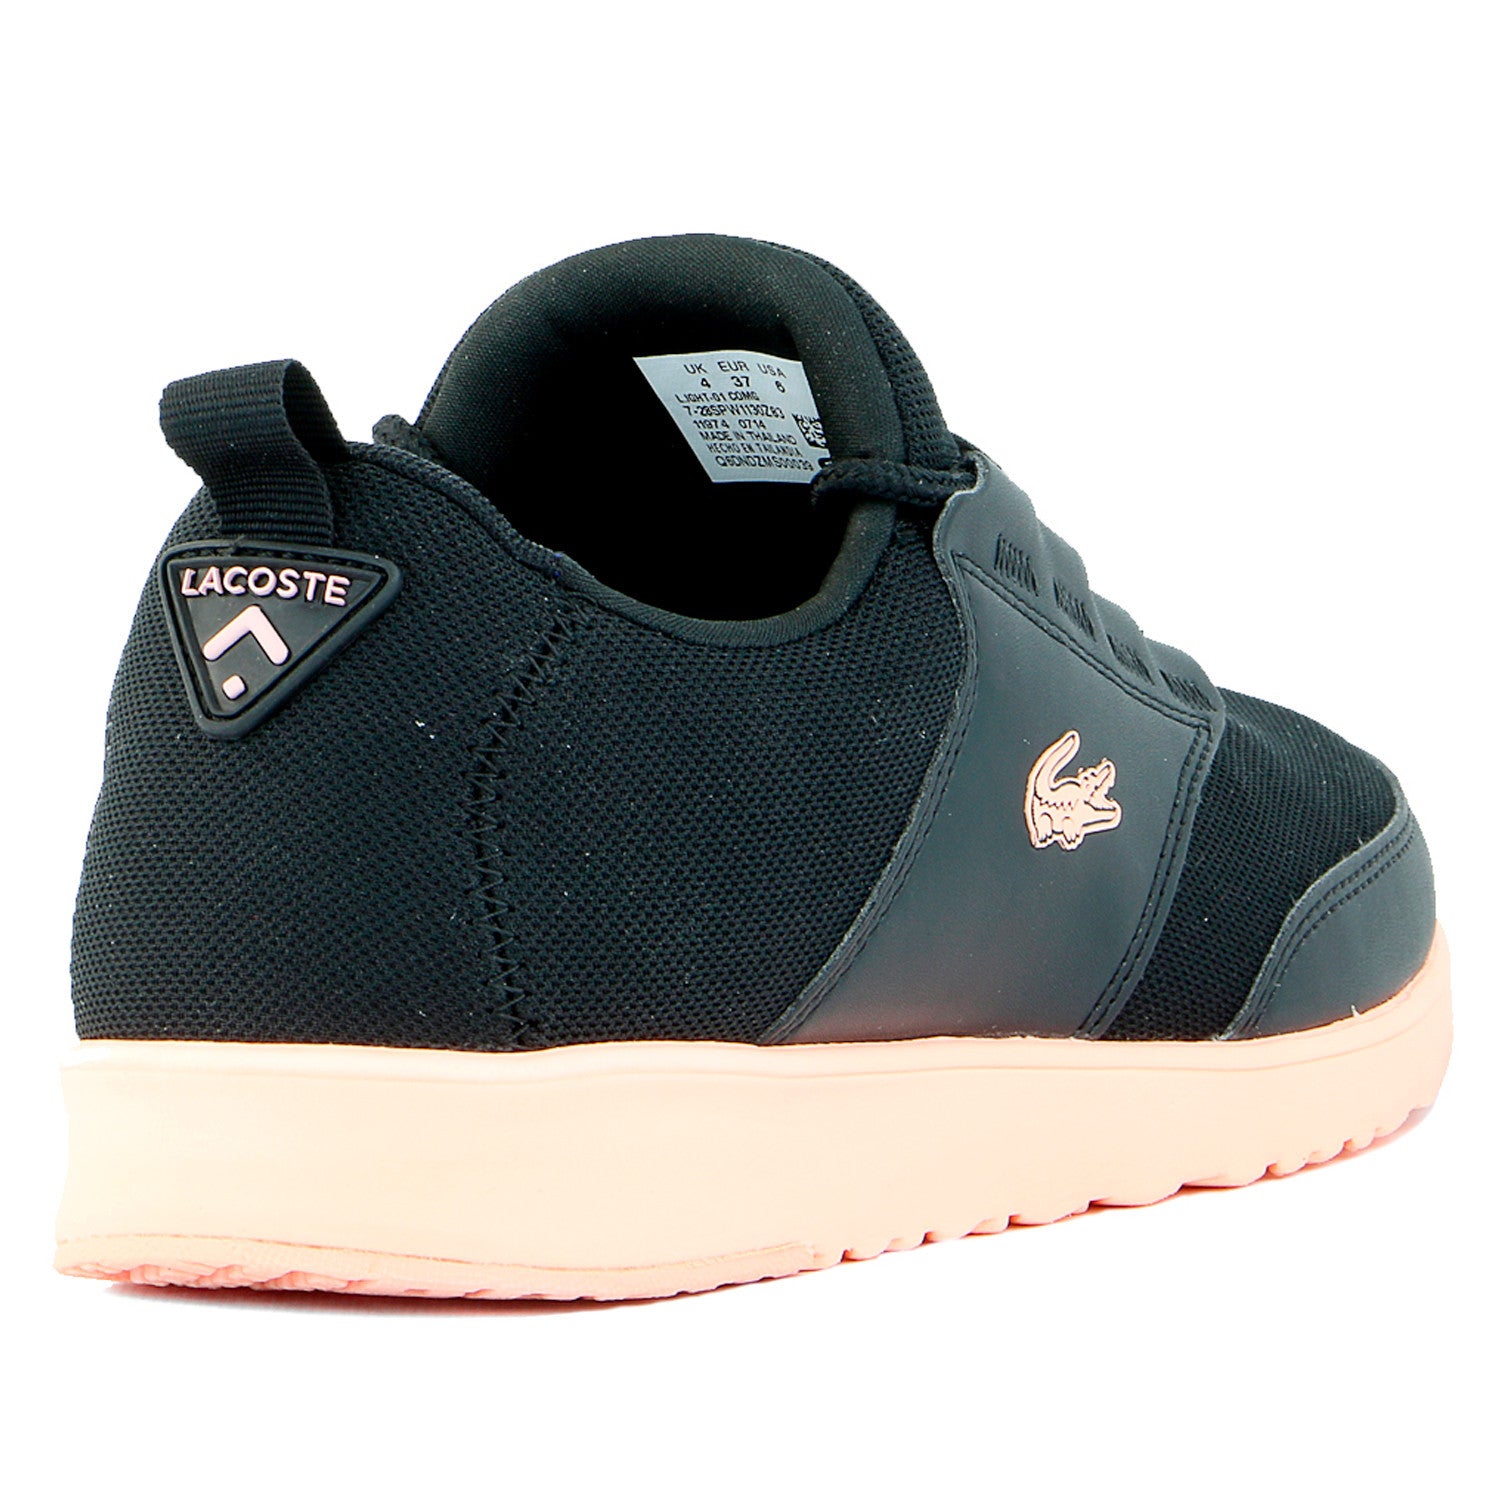 lucht Bestuiven Pas op Lacoste Mixed-Material Sneakers - Black/Orange - Womens - Shoplifestyle